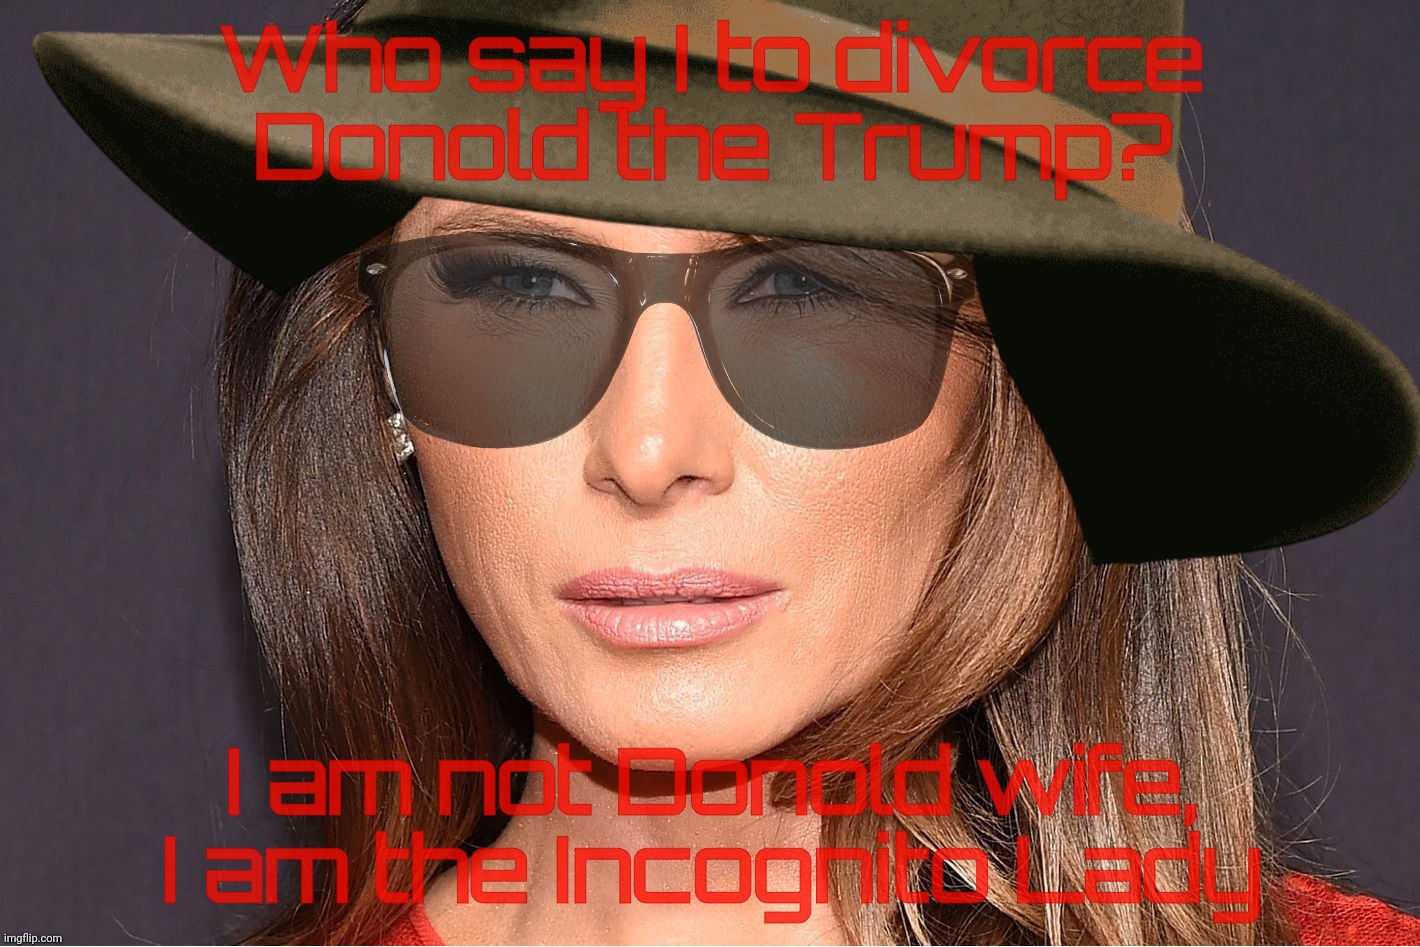 Divorce imminent? Come on, that was so 2015! | Who say I to divorce
Donold the Trump? I am not Donold wife,
I am the Incognito Lady | image tagged in melania trump,donald trump,trump,missing in distraction,gone shopping,don't worry honey i'll be home soon | made w/ Imgflip meme maker